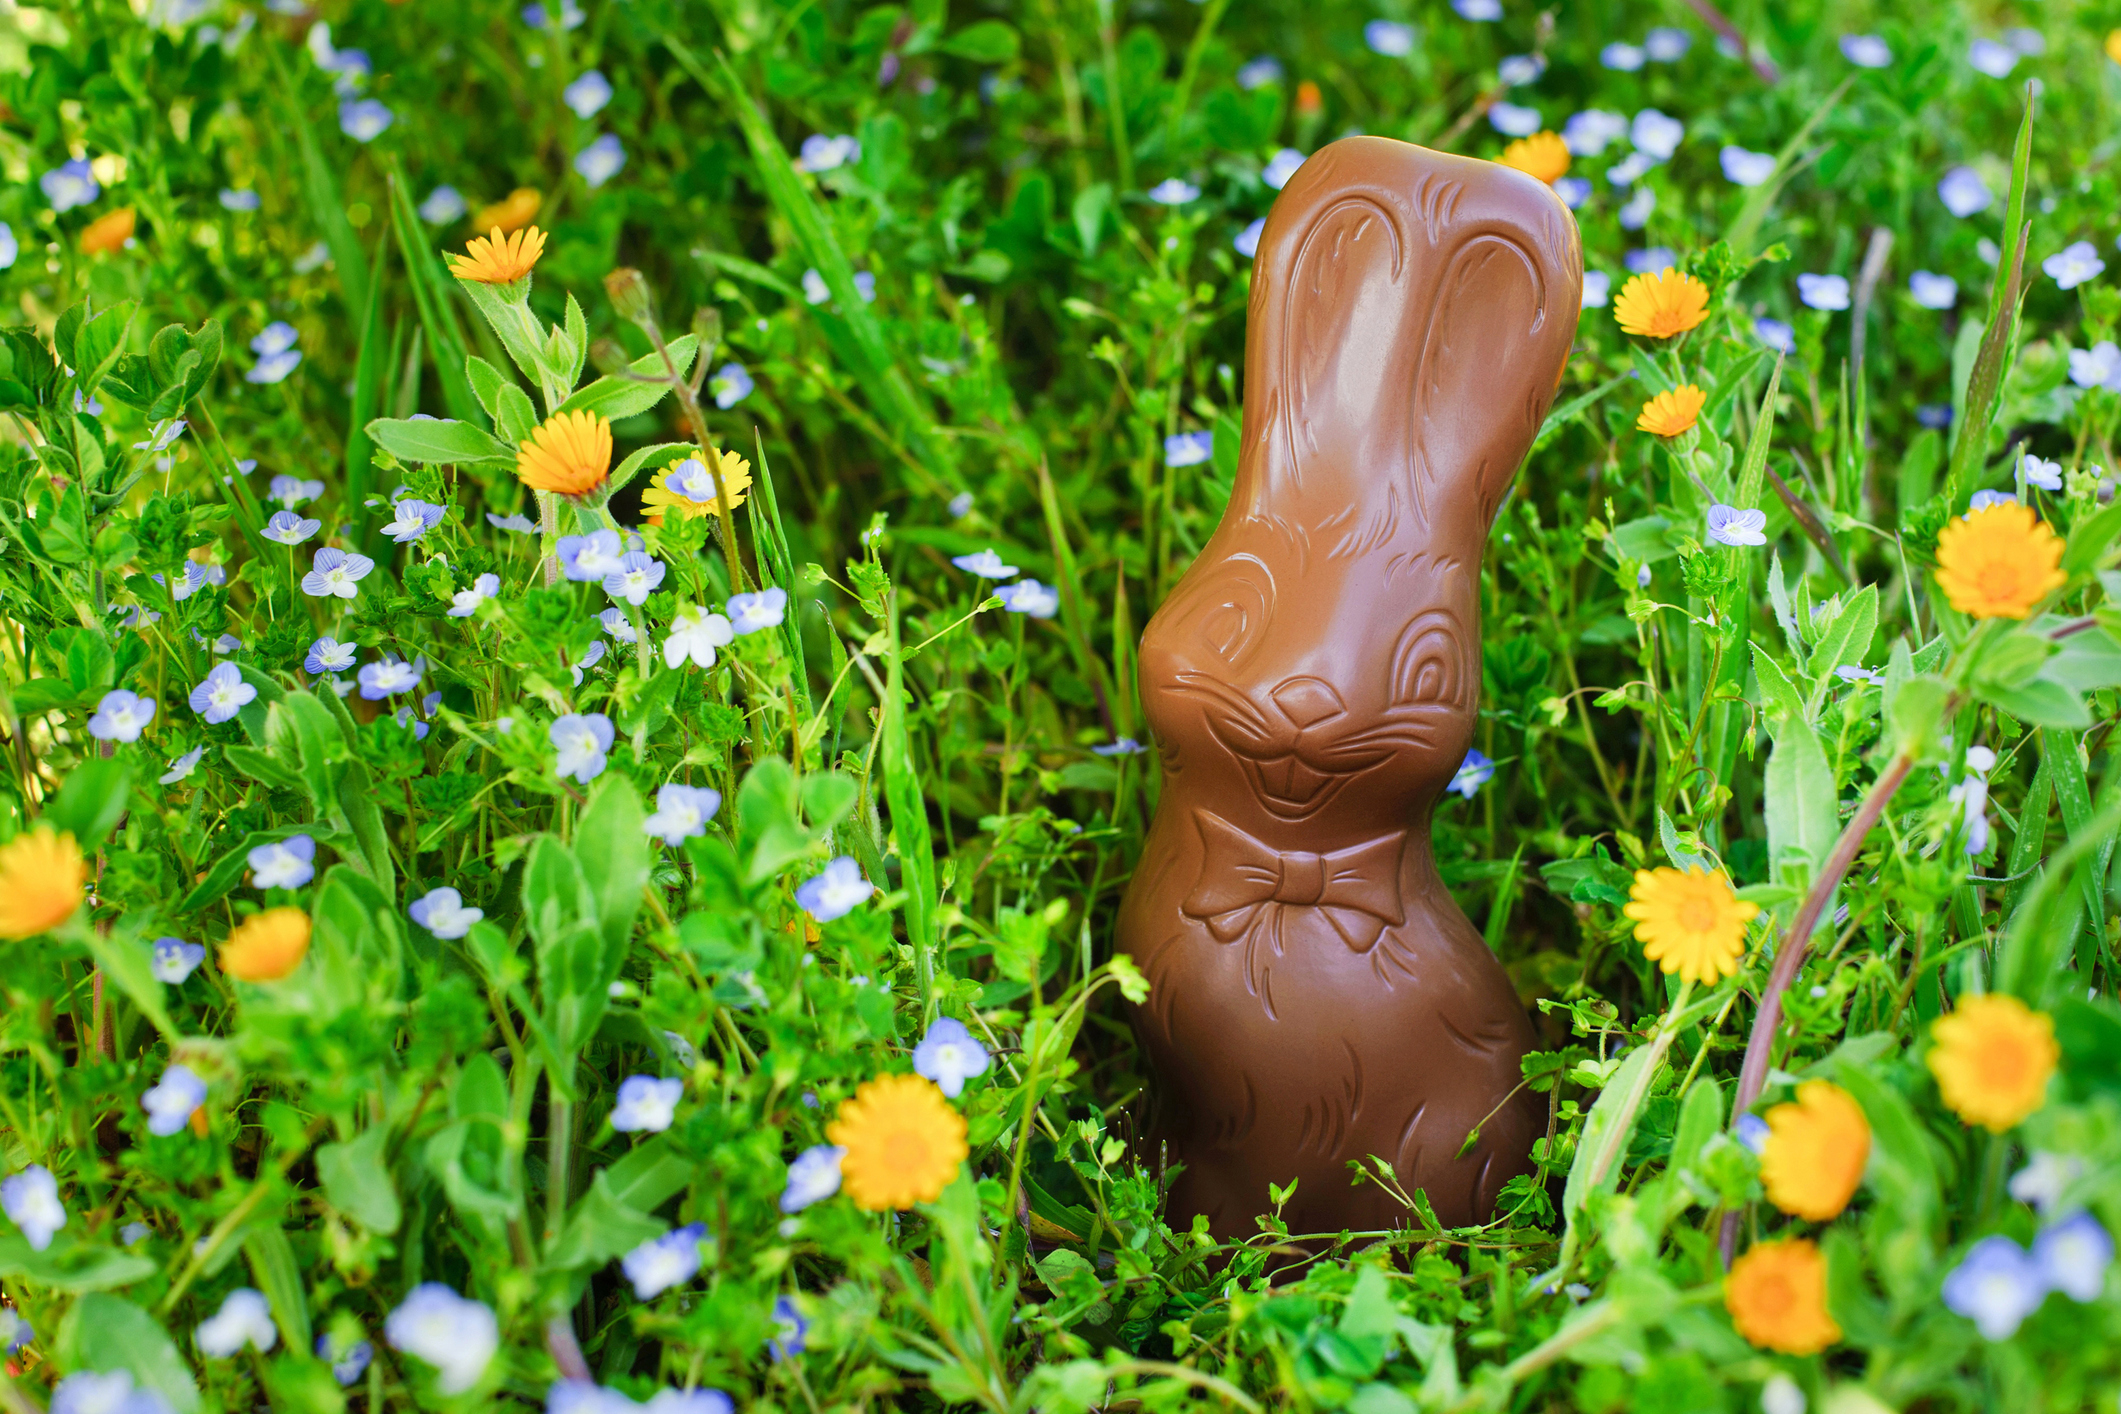 Chocolate bunny nestled in a field of wildflowers